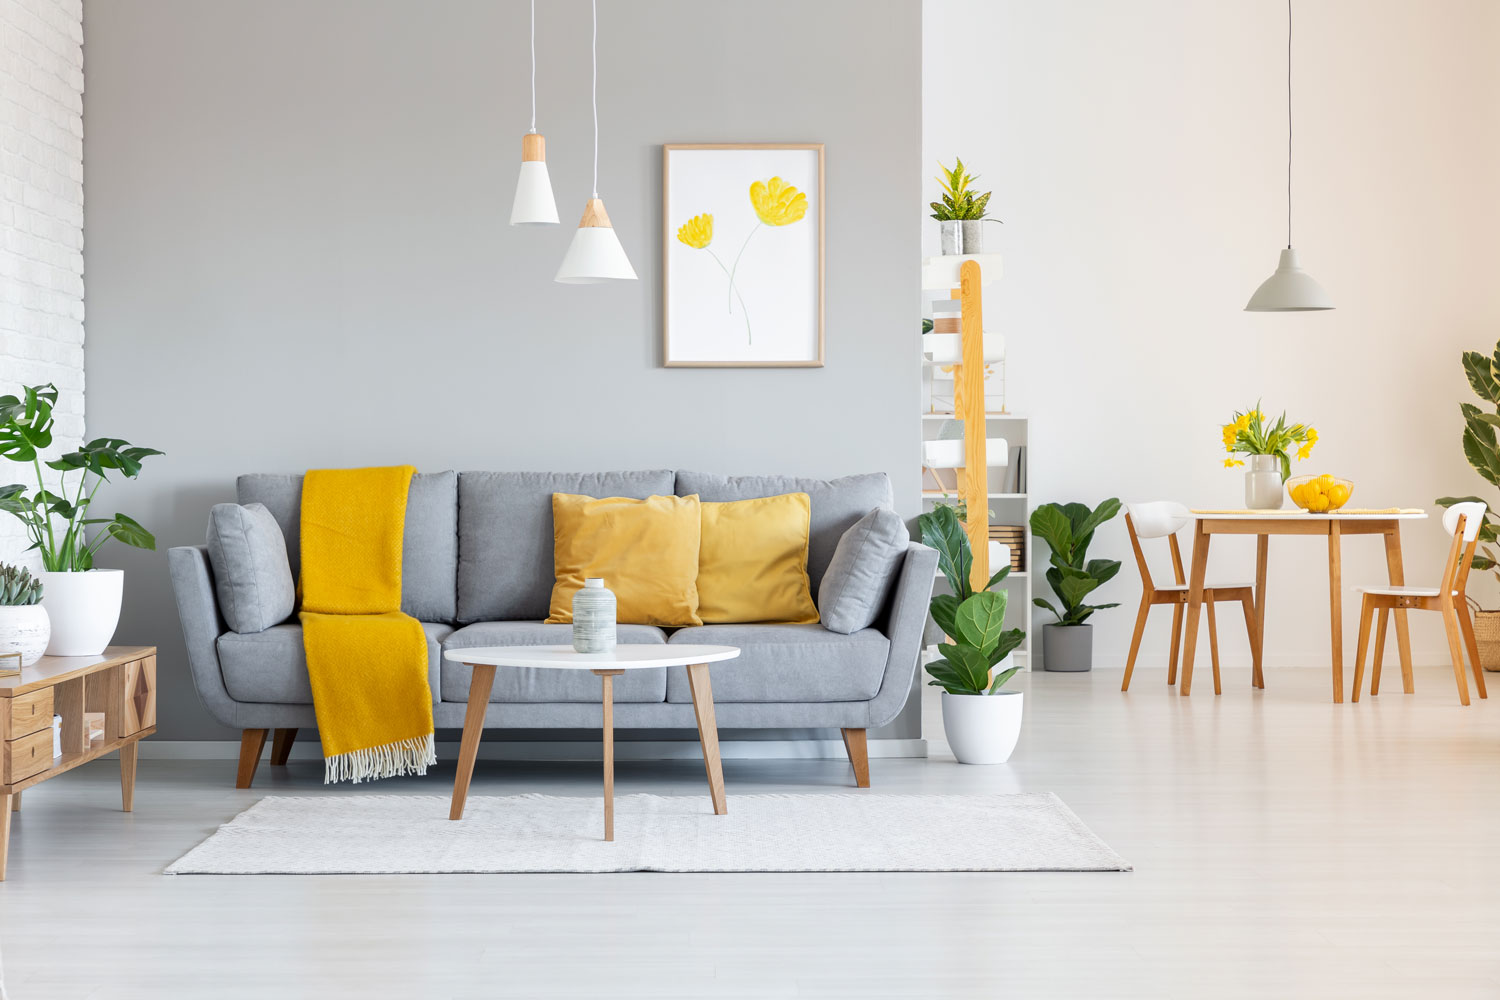 A gray sofa with yellow throw pillows and a white dangling lamps